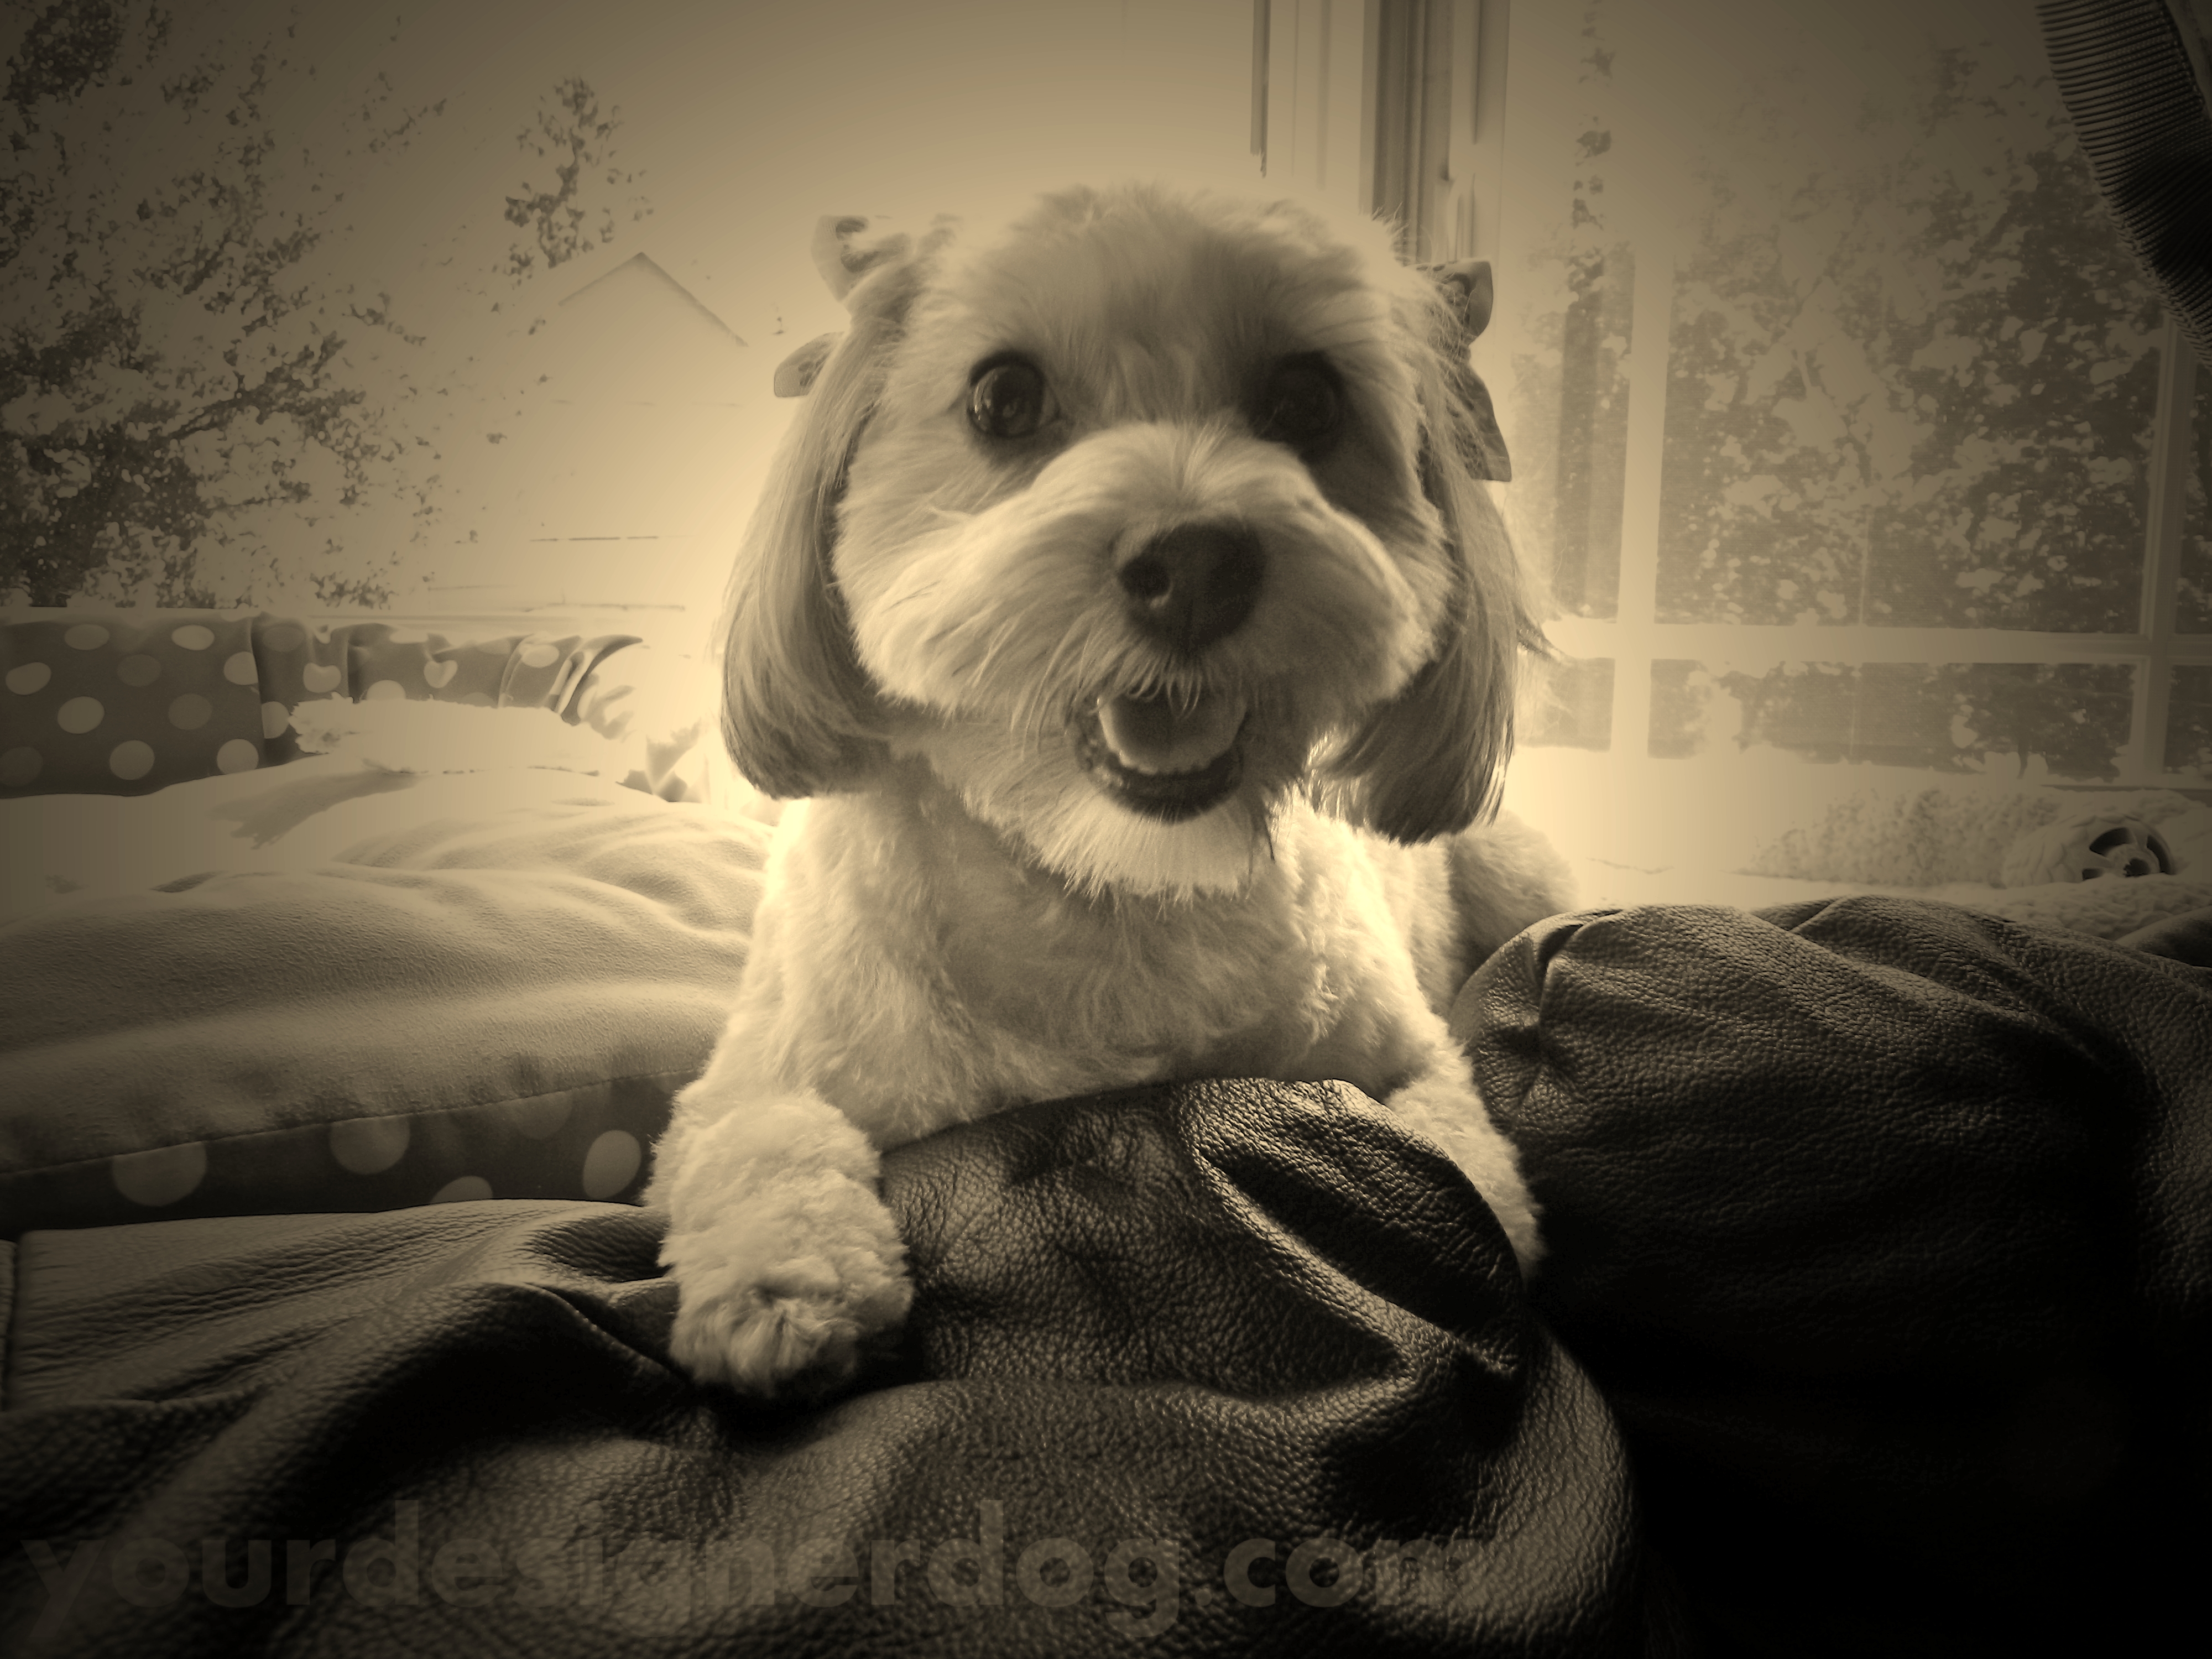 dogs, designer dogs, yorkipoo, yorkie poo, haircut, sepia photography, doggy in the window